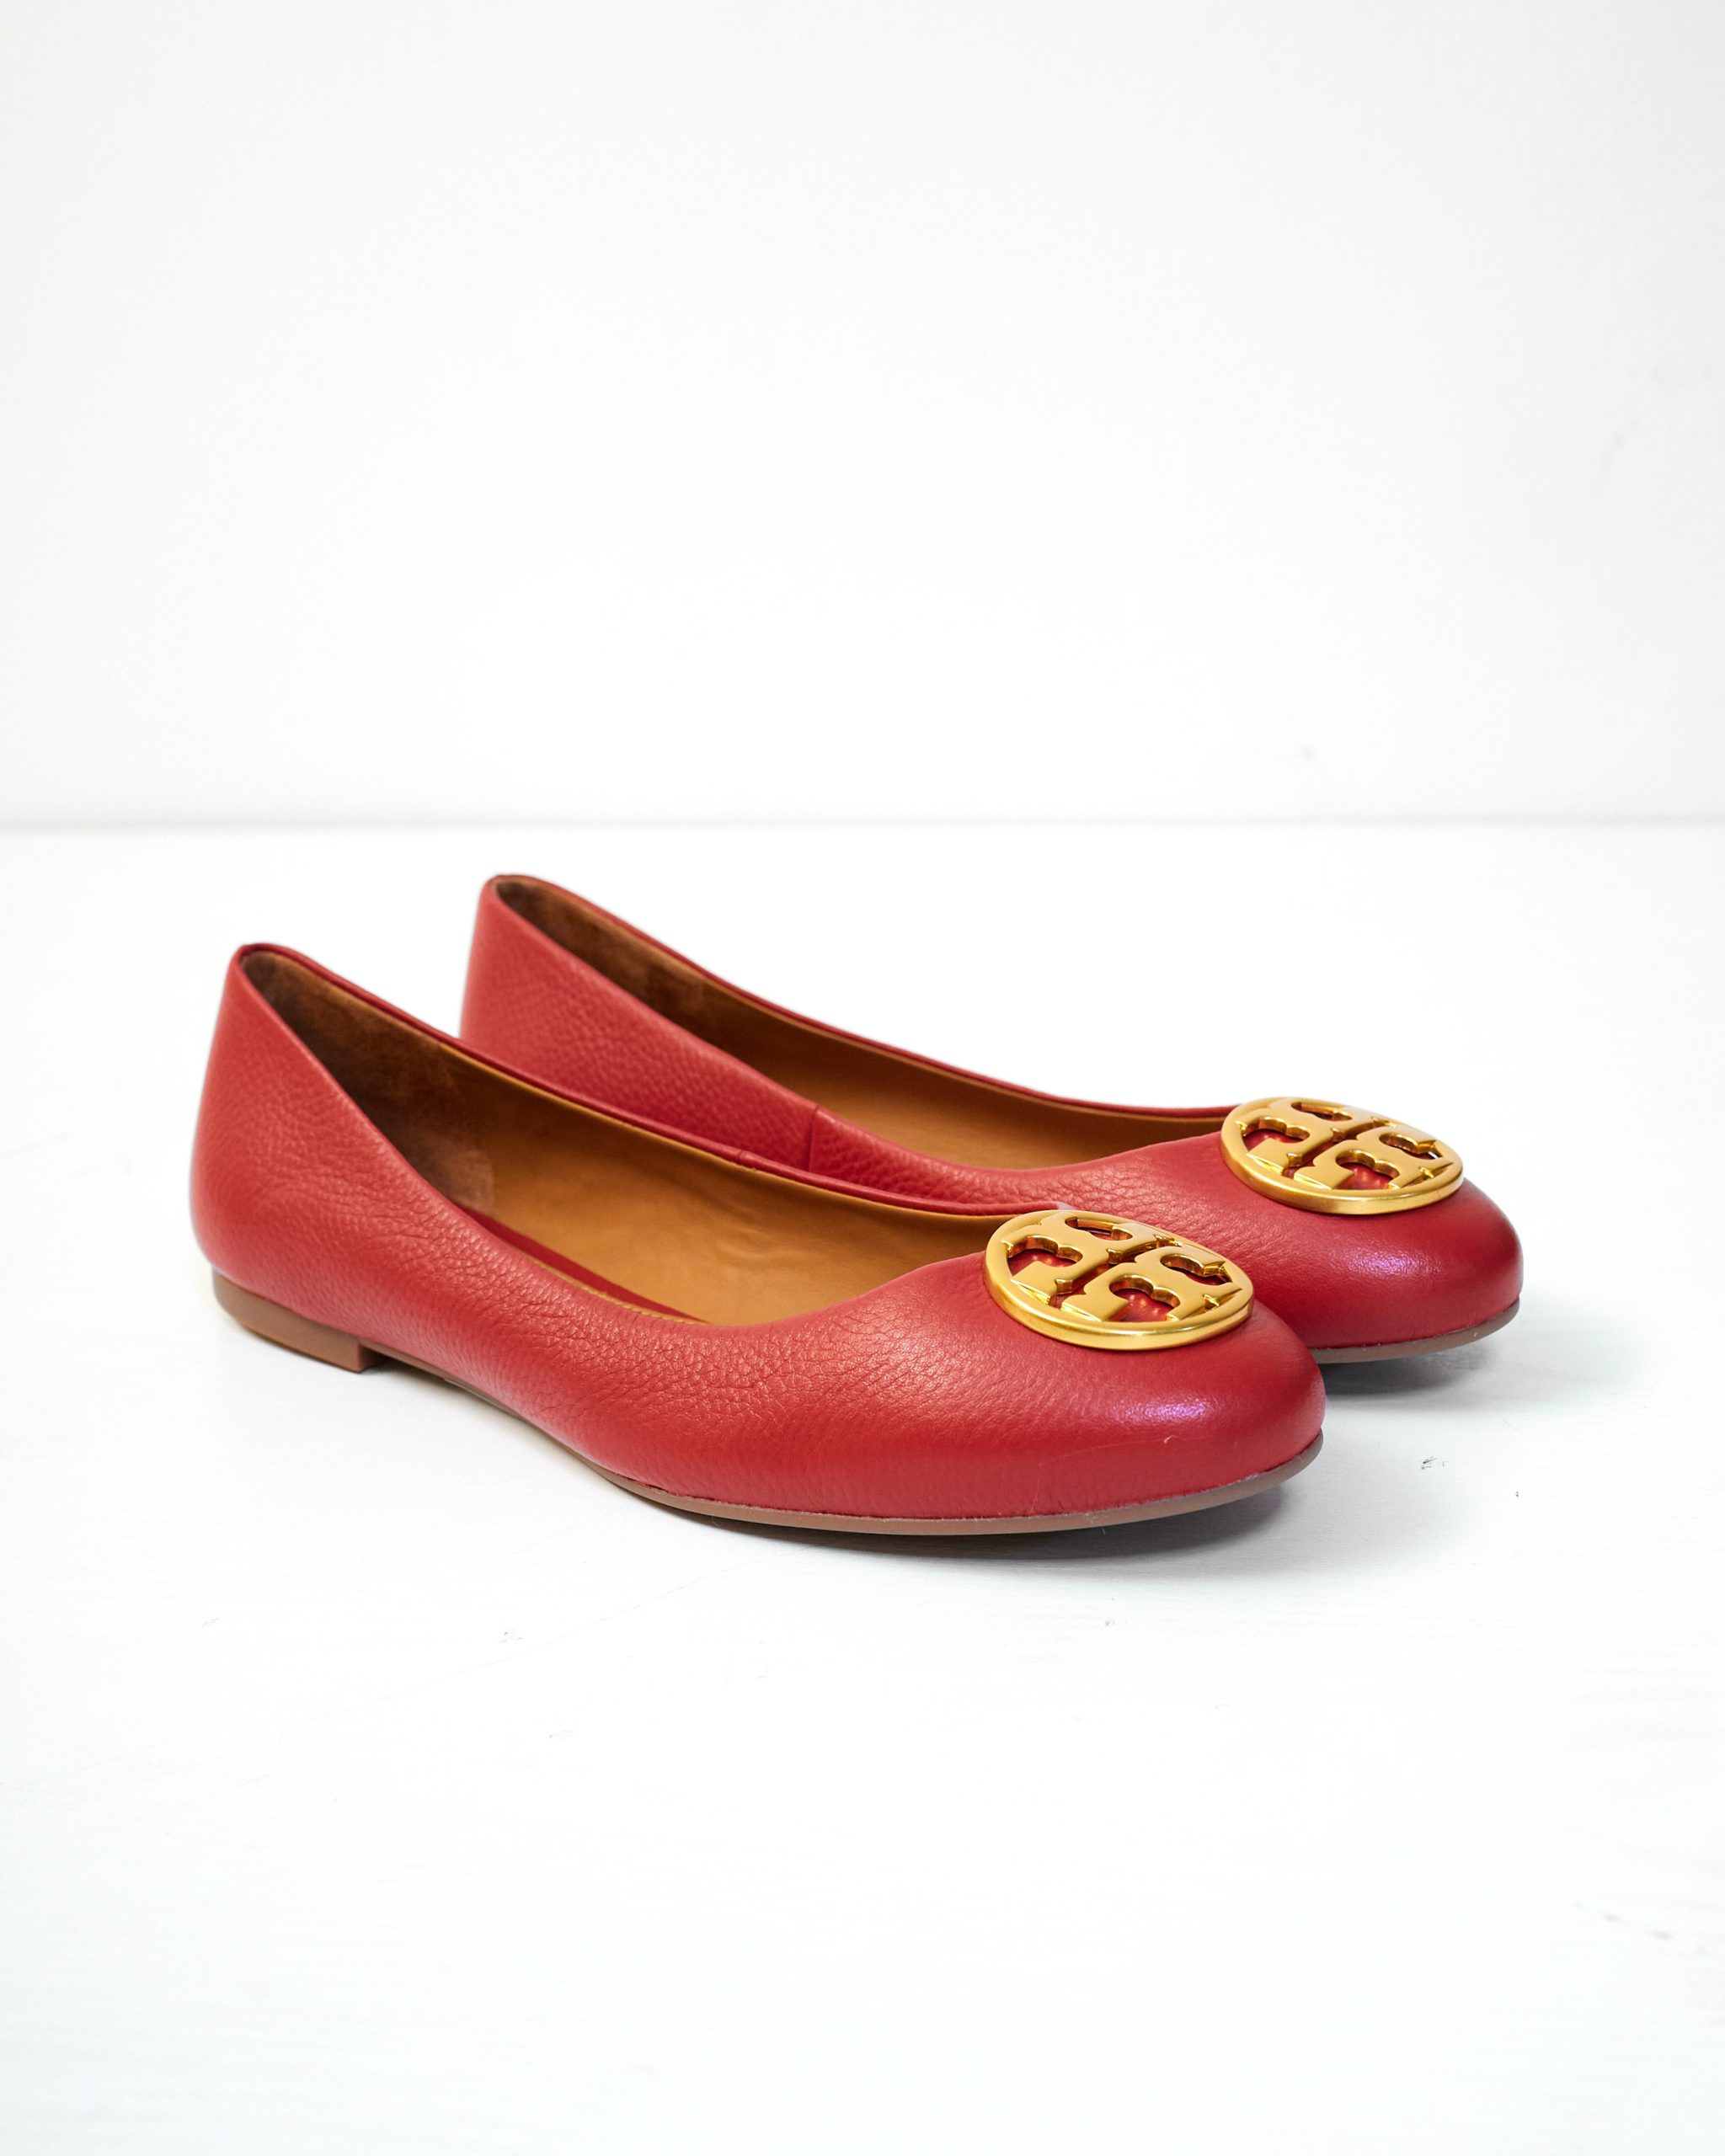 TORY BURCH CHELSEA TUMBLED LEATHER BRILLIANT RED BALLET – Posh Apparels